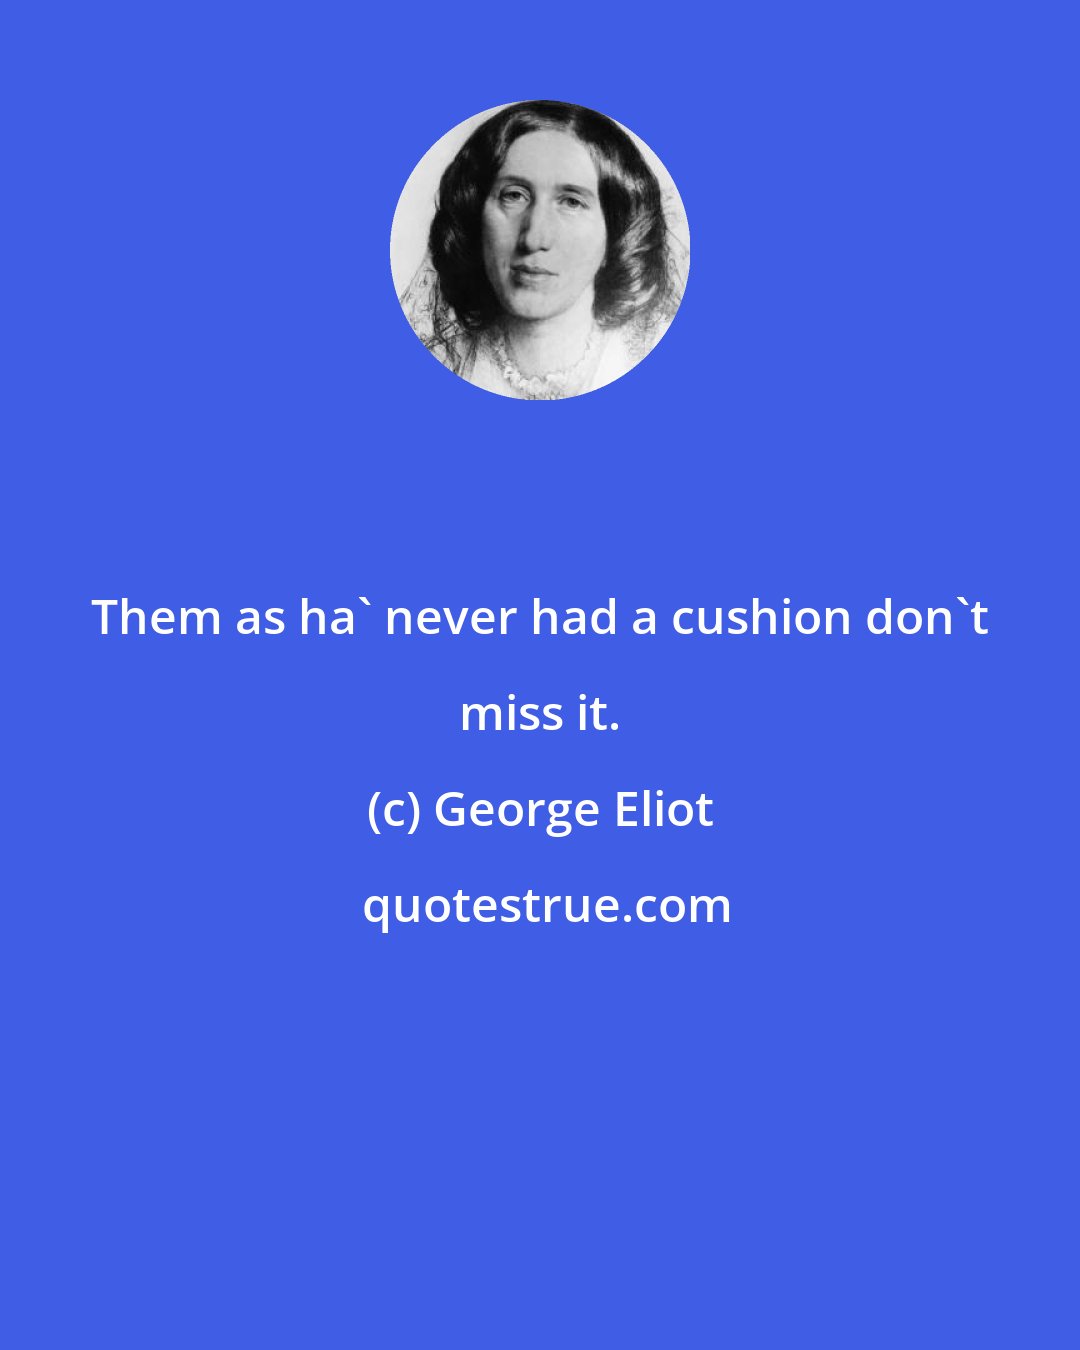 George Eliot: Them as ha' never had a cushion don't miss it.